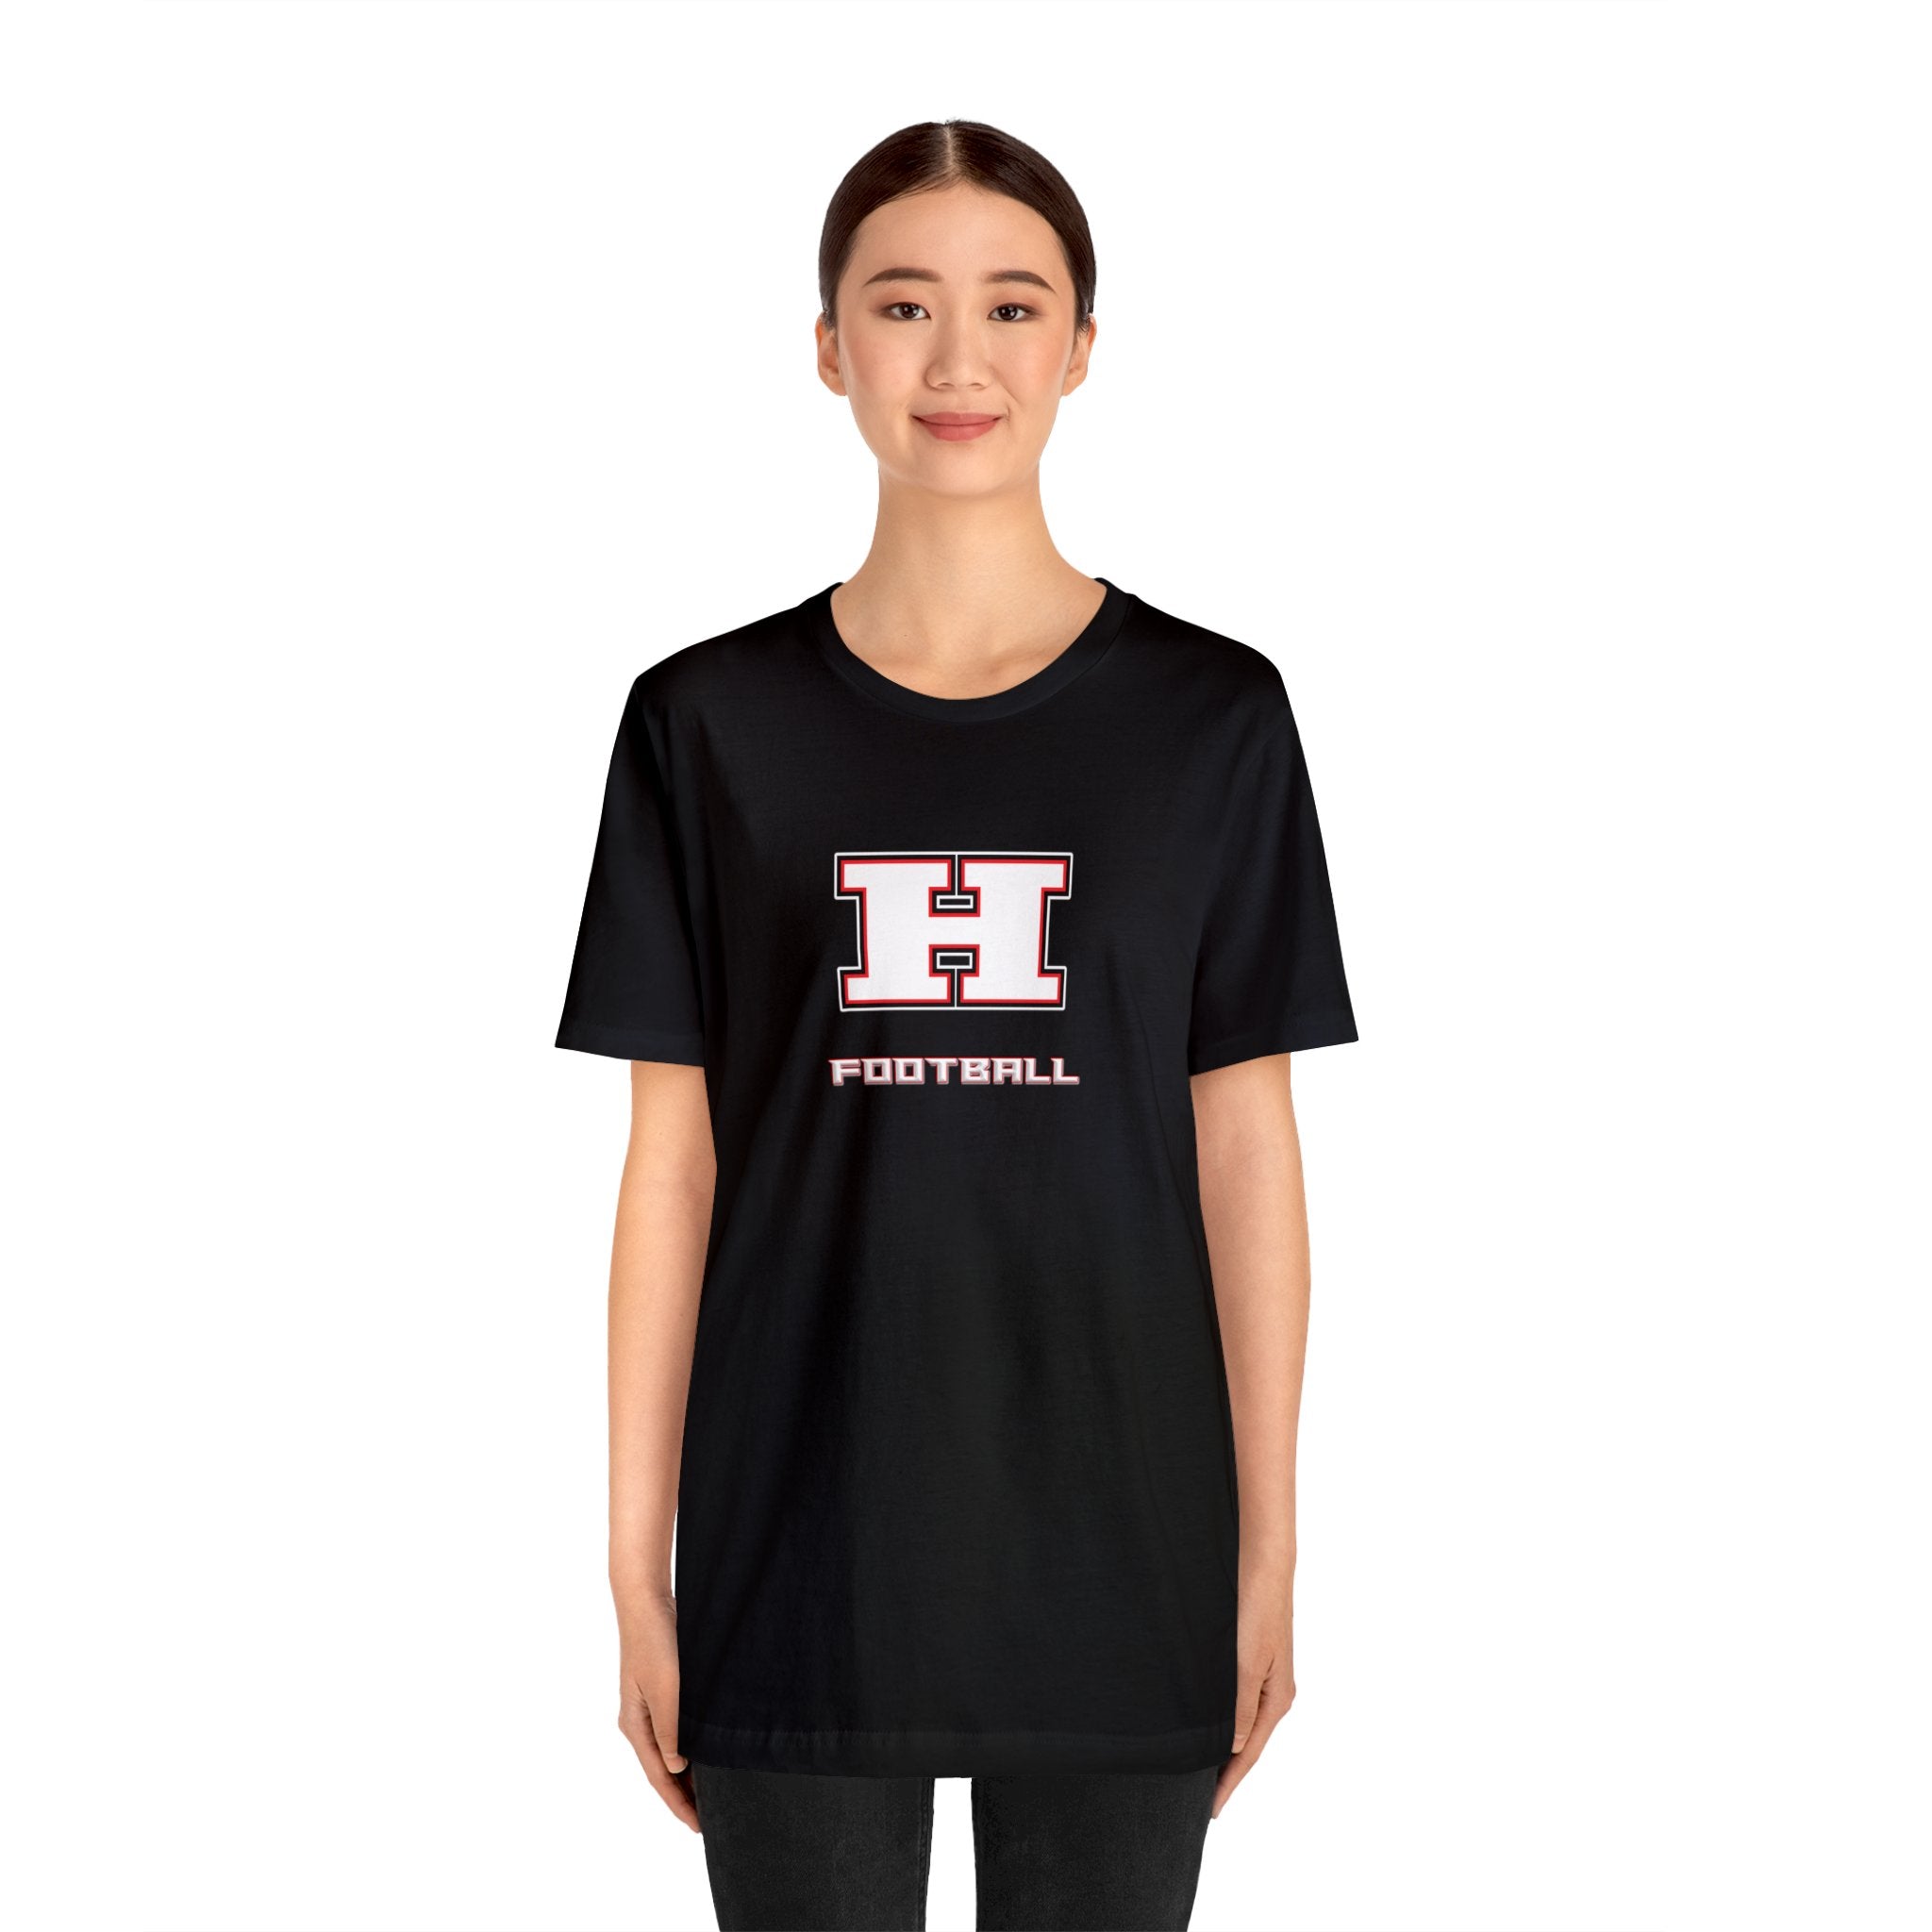 Hurricane Tigers Football UNDEFEATED T-Shirt